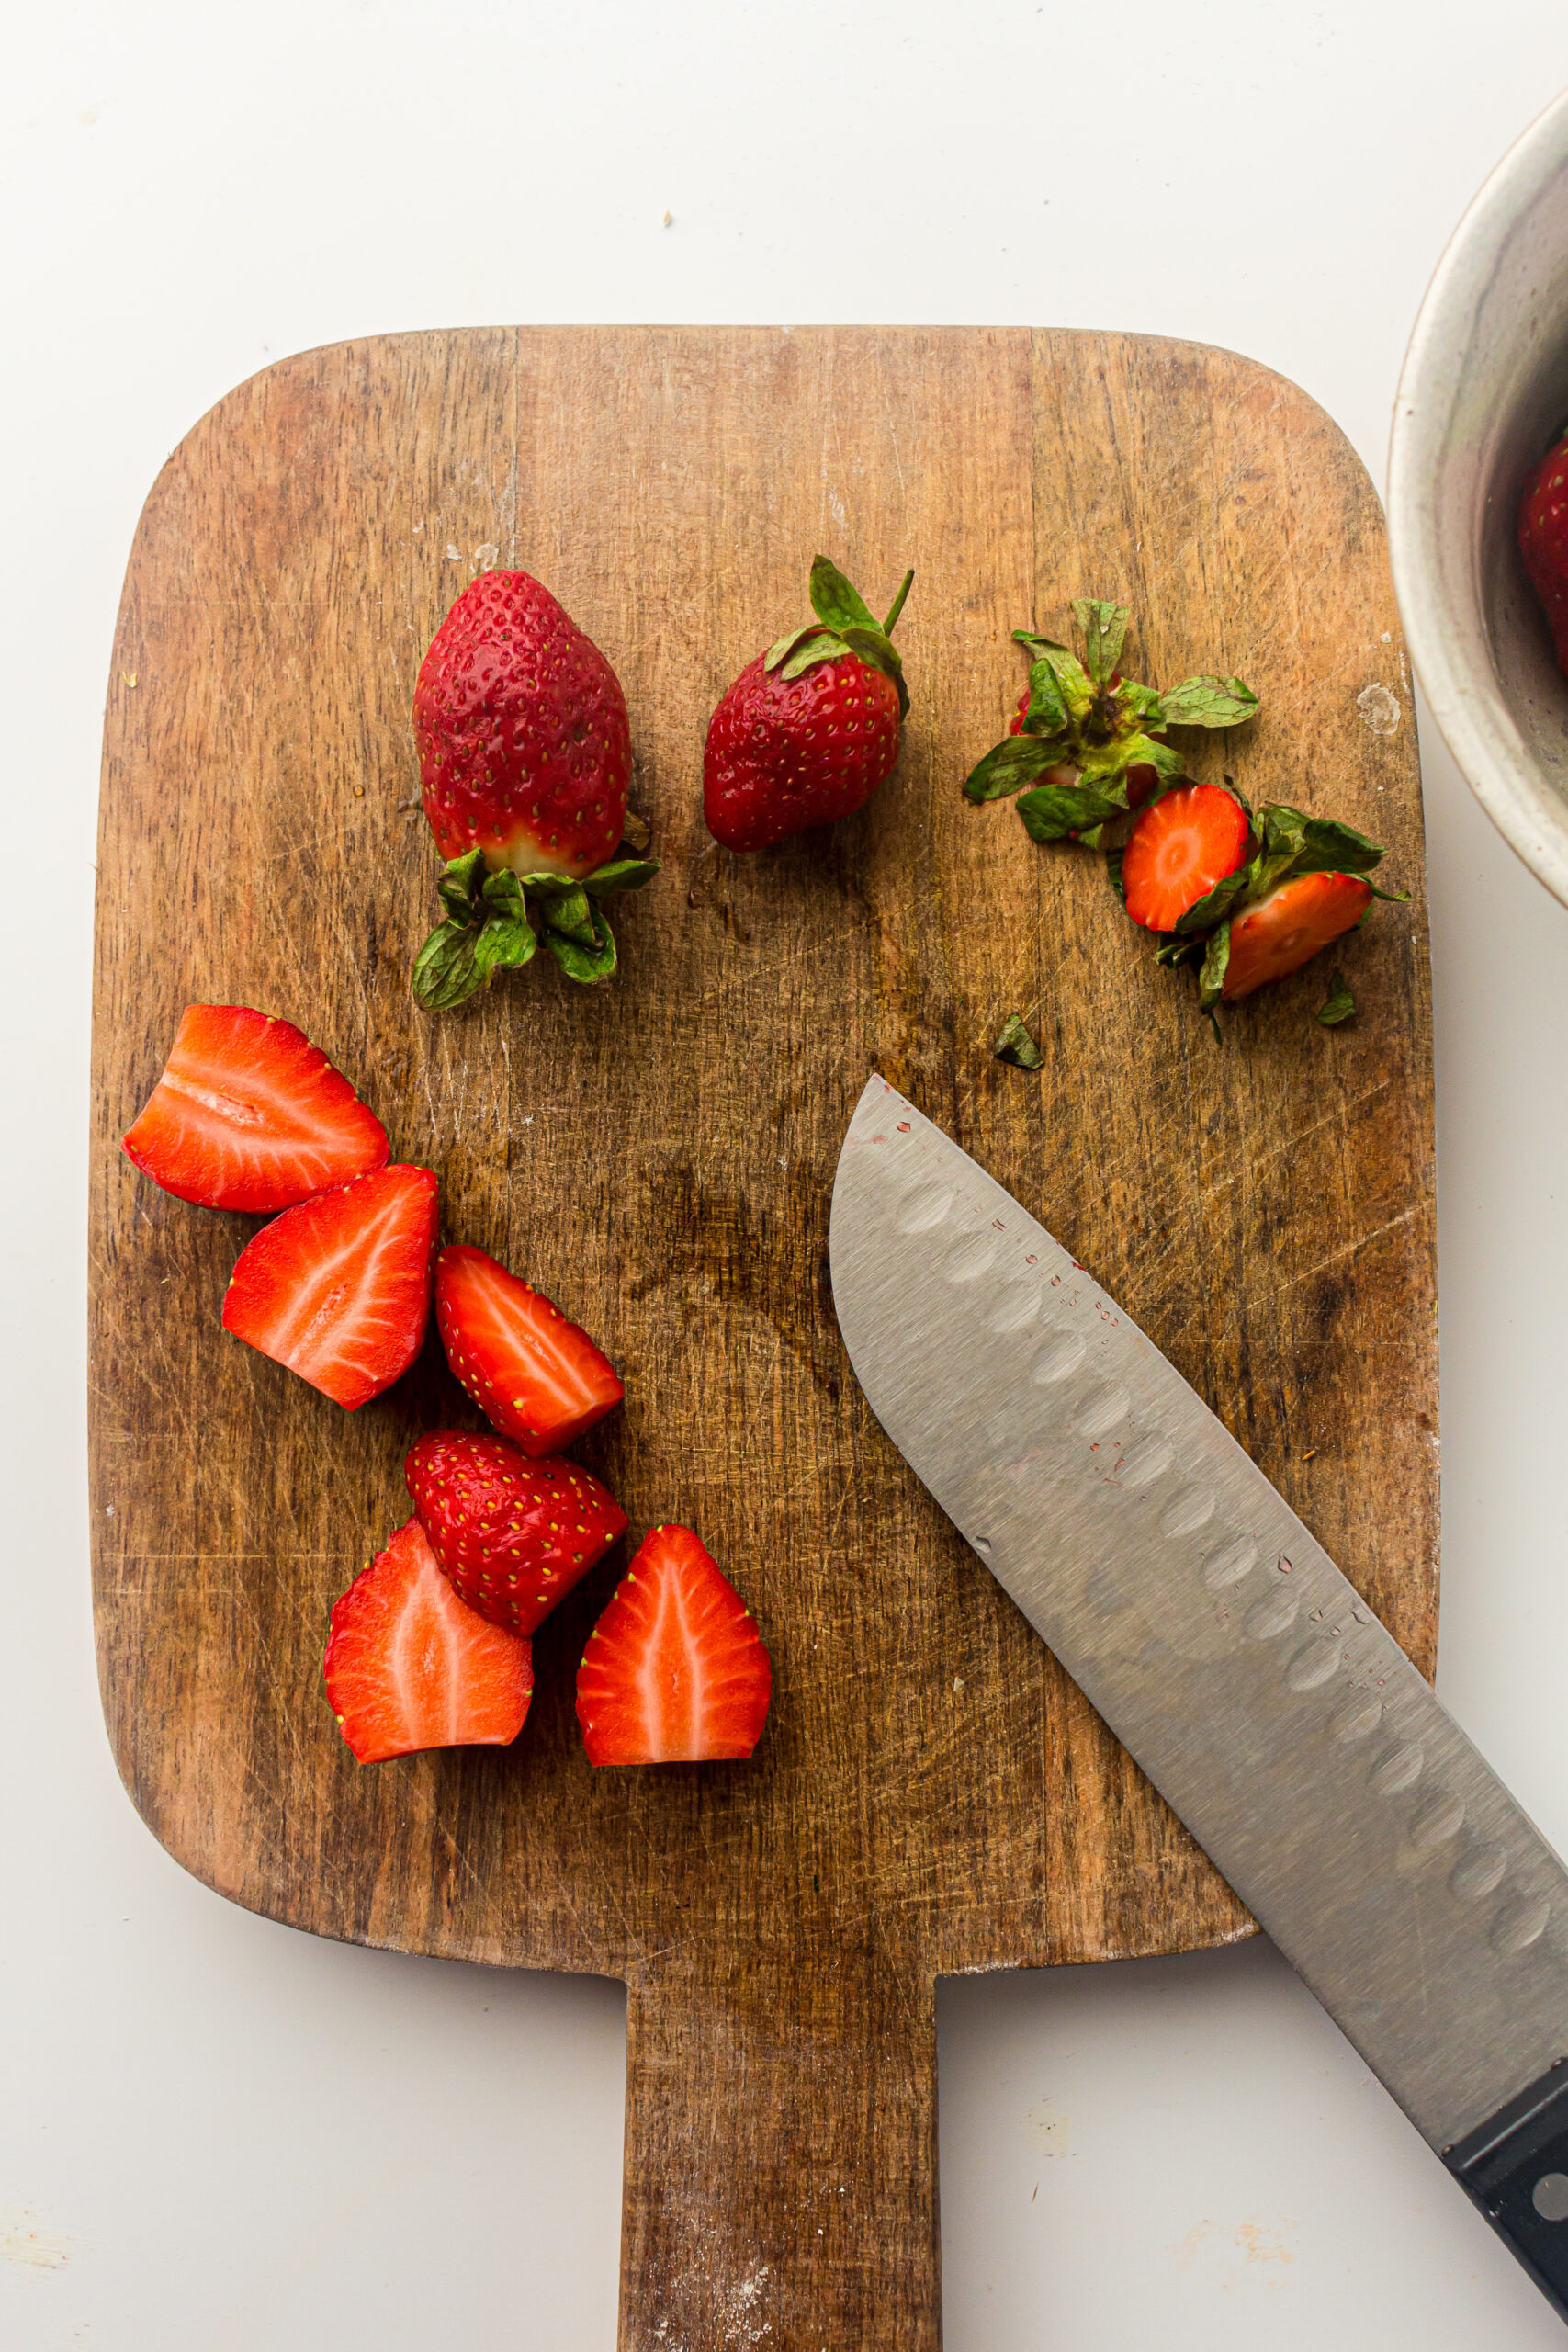 Prep the strawberries and slice them 